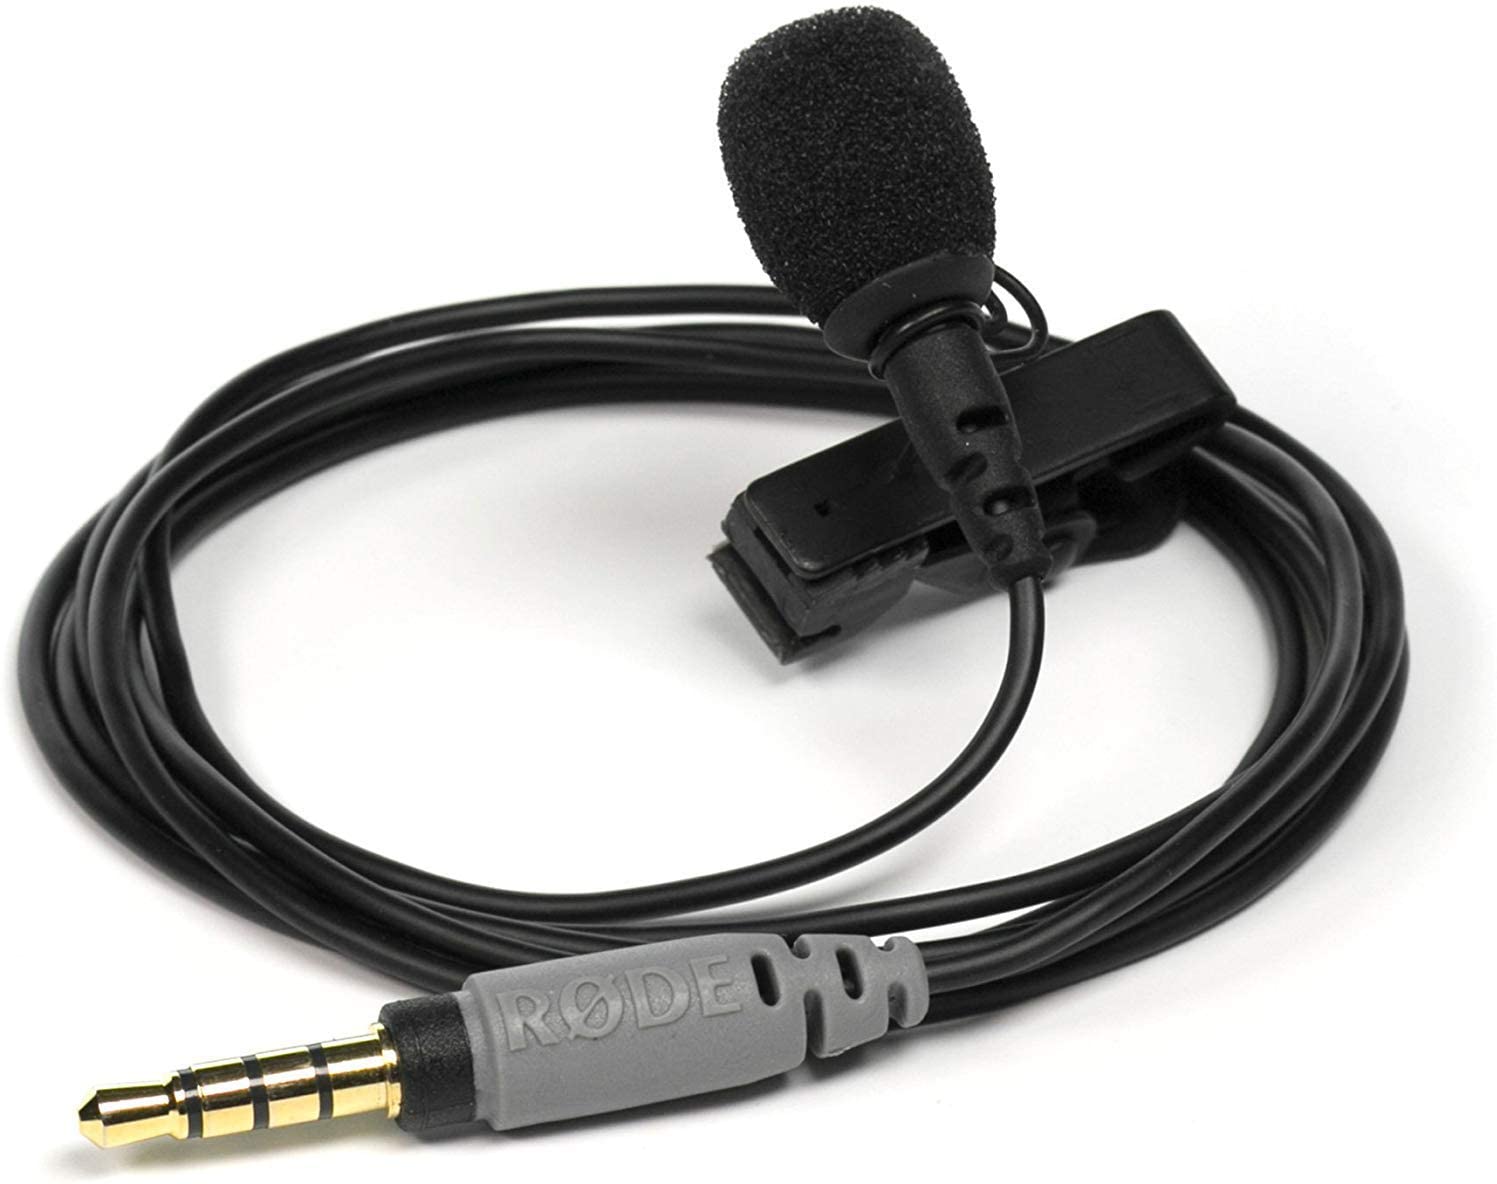 RØDE smartLav+ - how to record a podcast on iphone